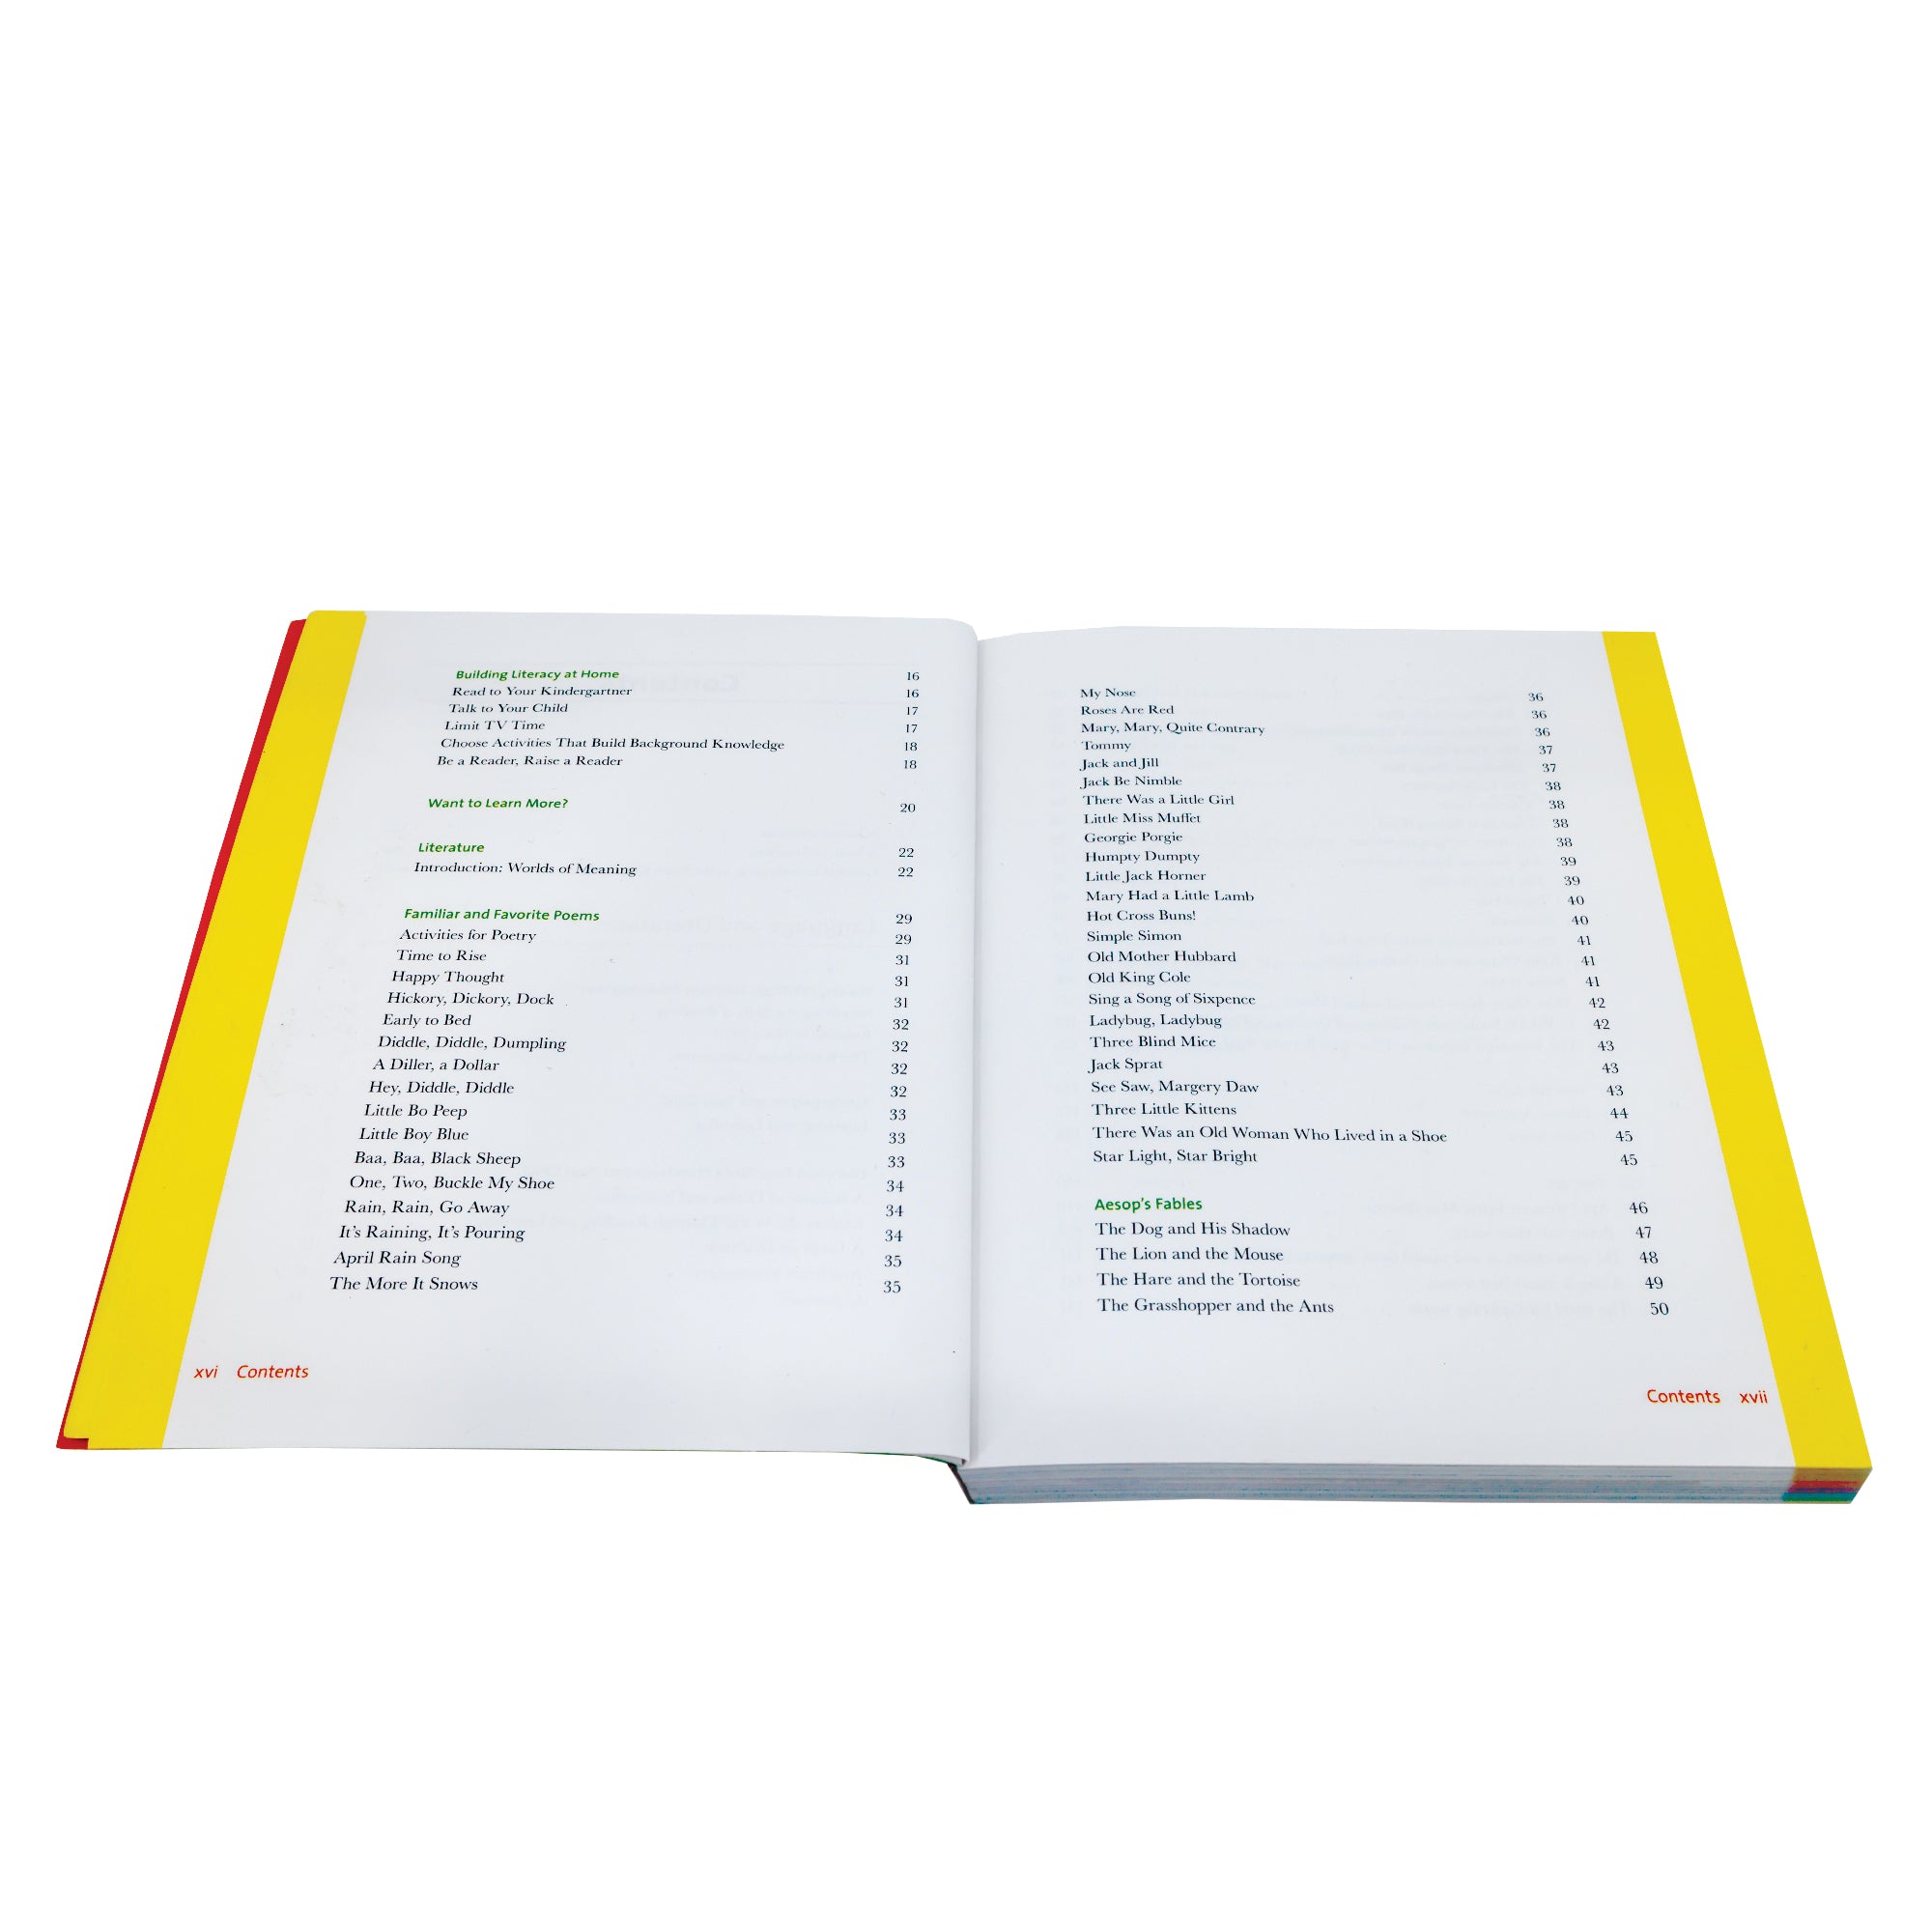 The What Your Kindergartener Needs to Know book open to show the contents on a white page with a yellow boarder along the outsides of the pages. The section titles are in green with black text below.